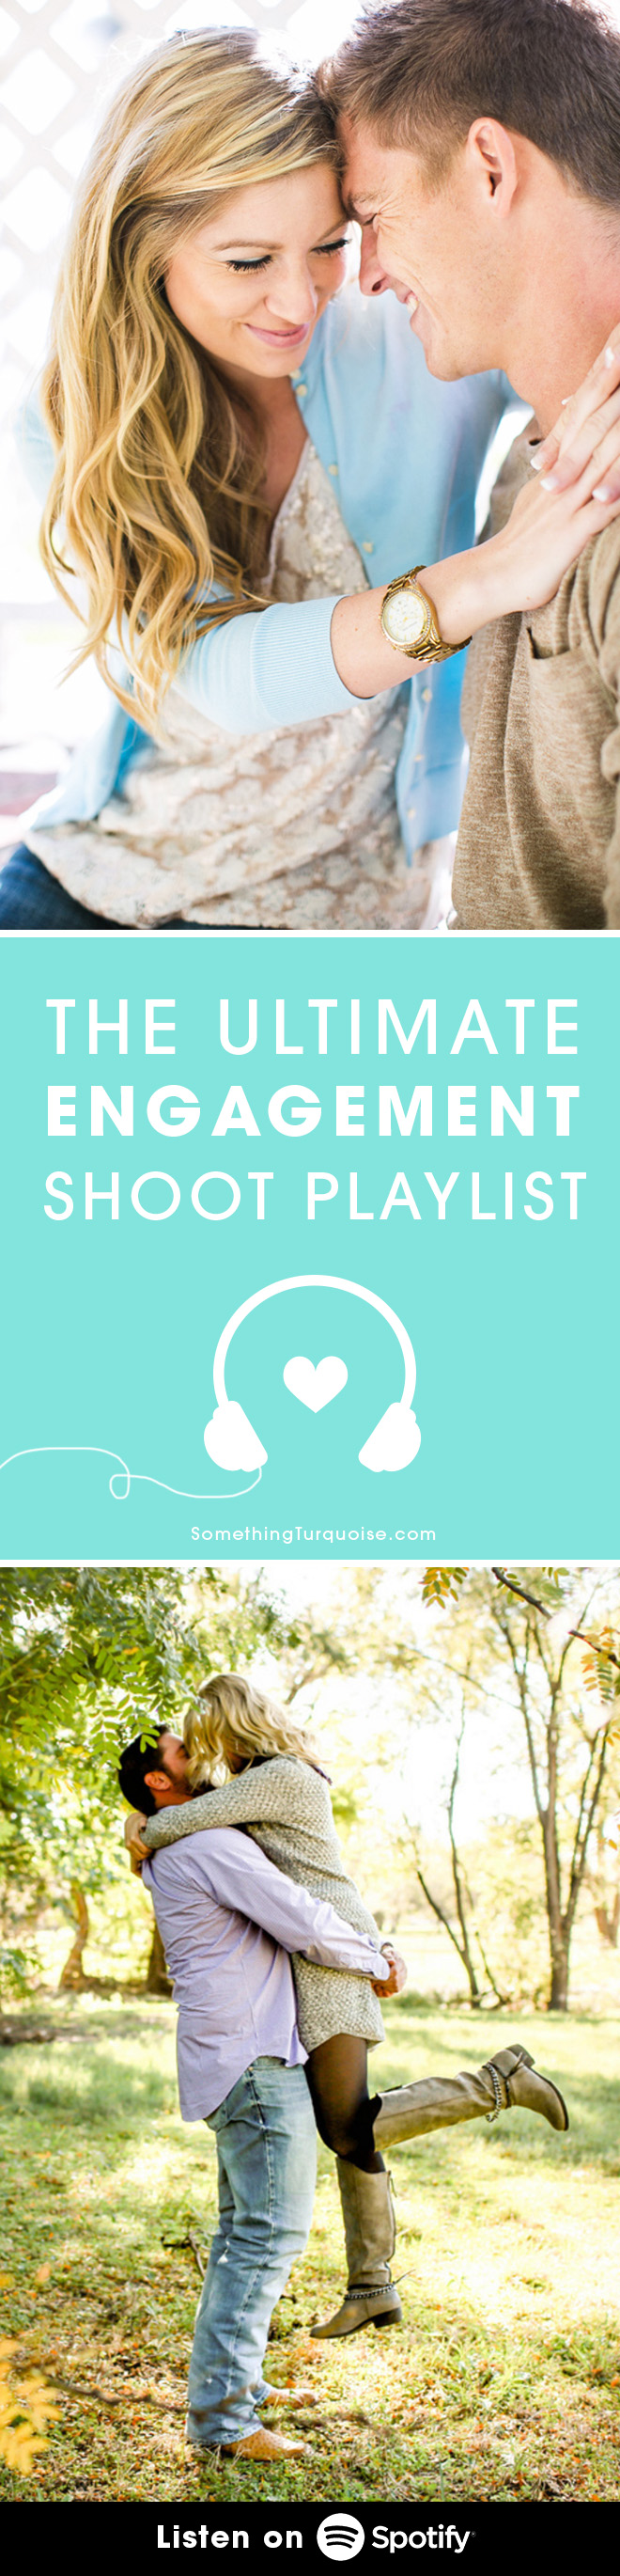 The Ultimate Playlist for your Engagement Shoot, listen for free on Spotify!